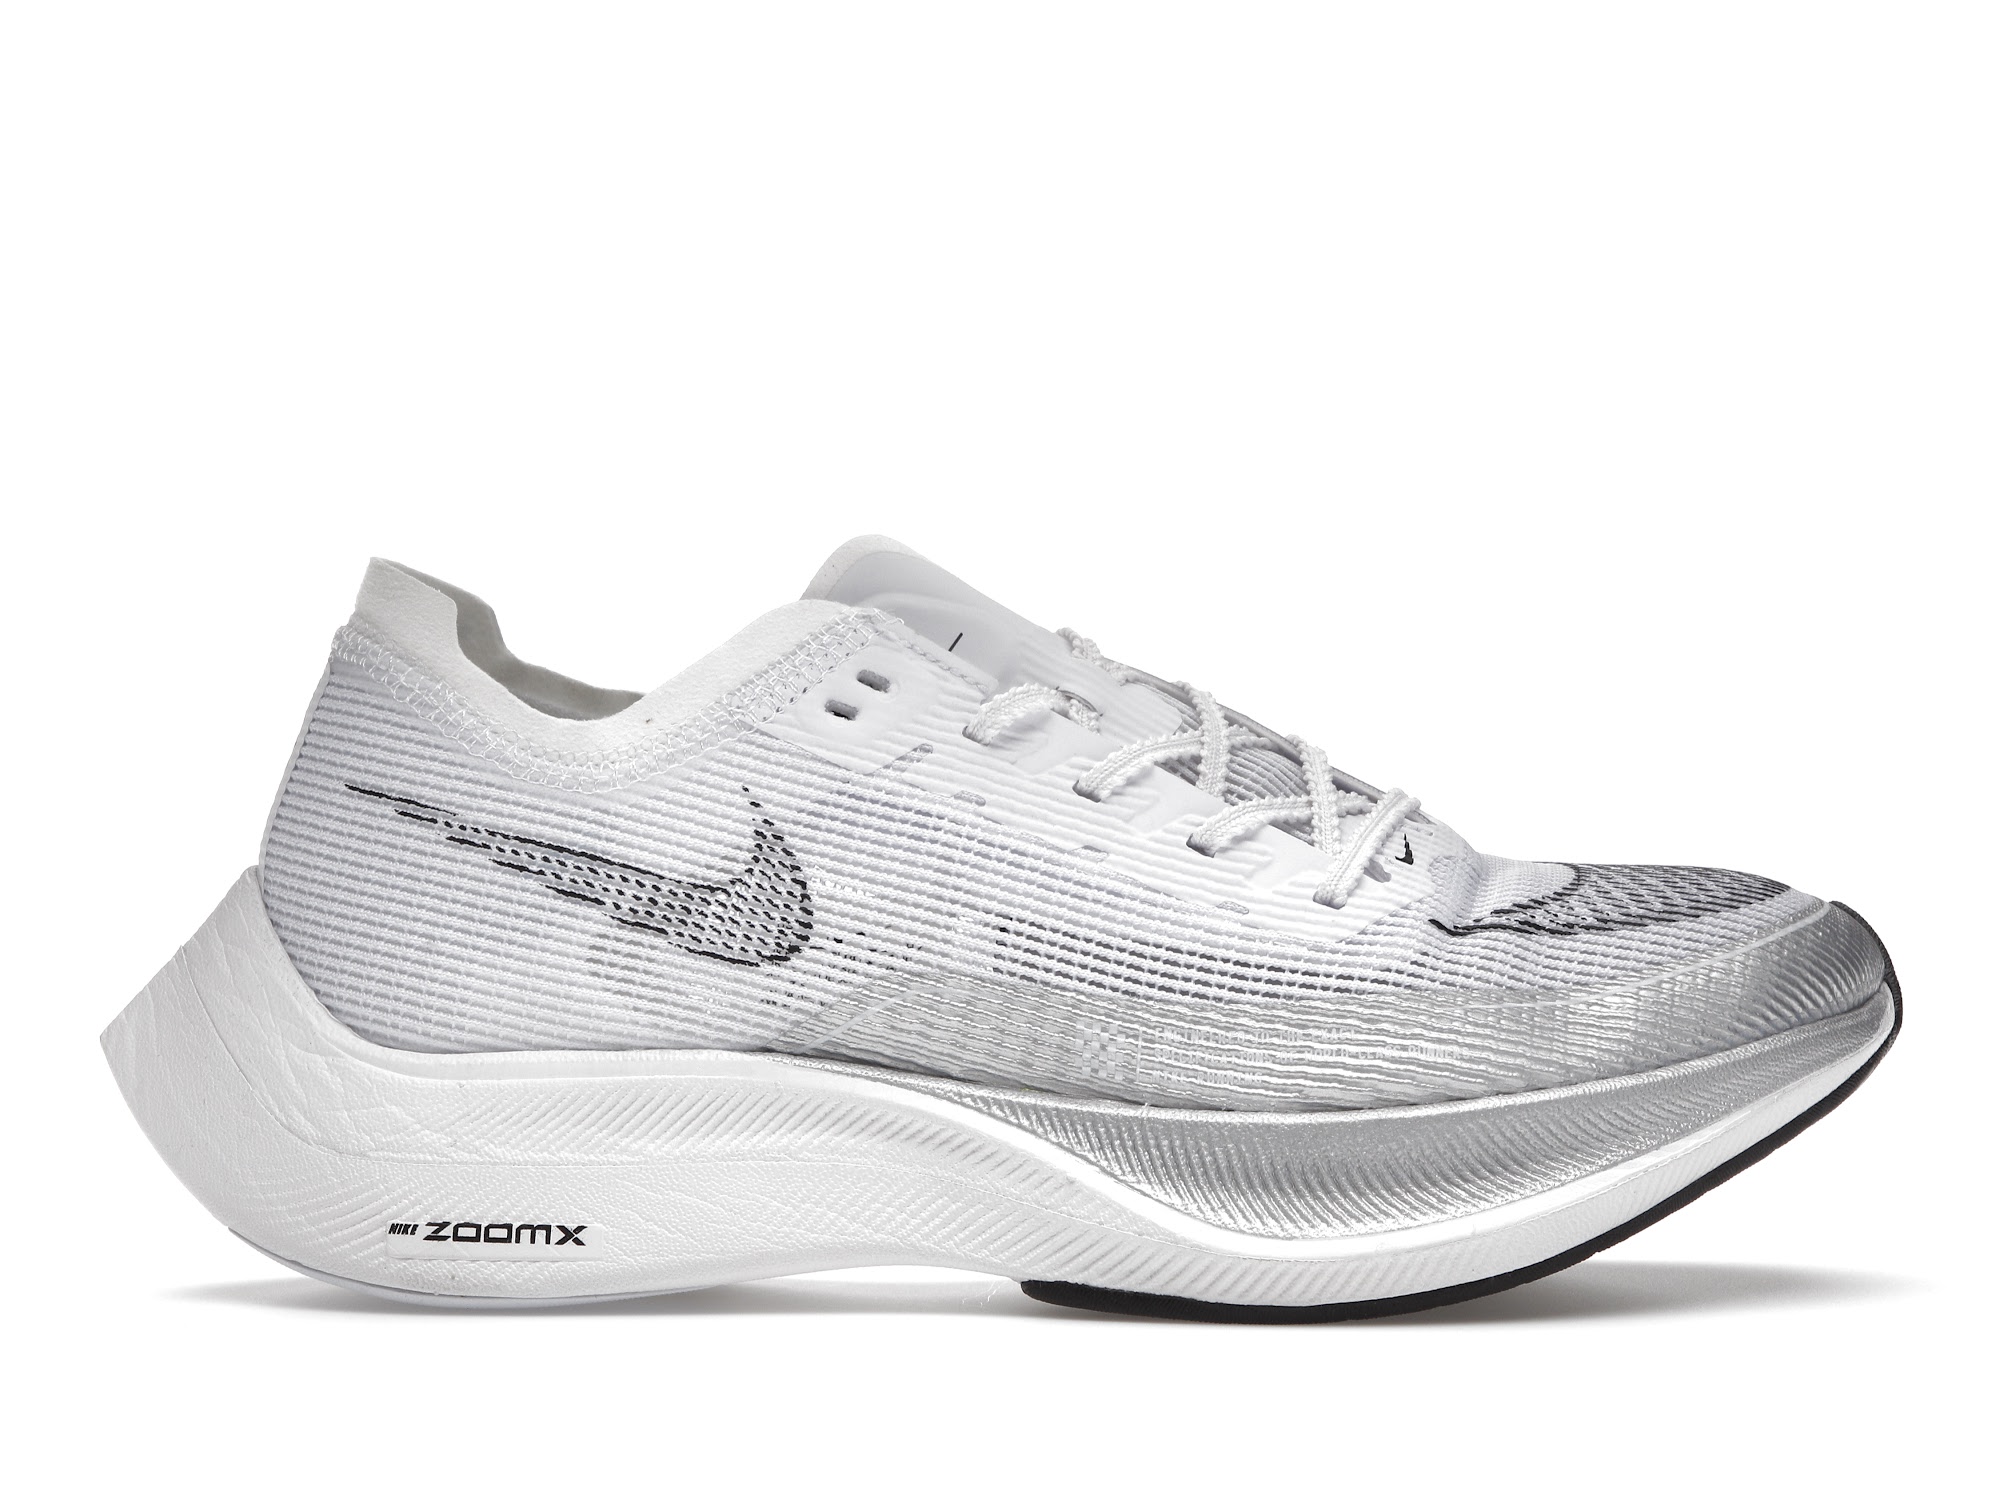 NIKE ZOOMX VAPORFLY NEXT％2 ヴェイパーフライ